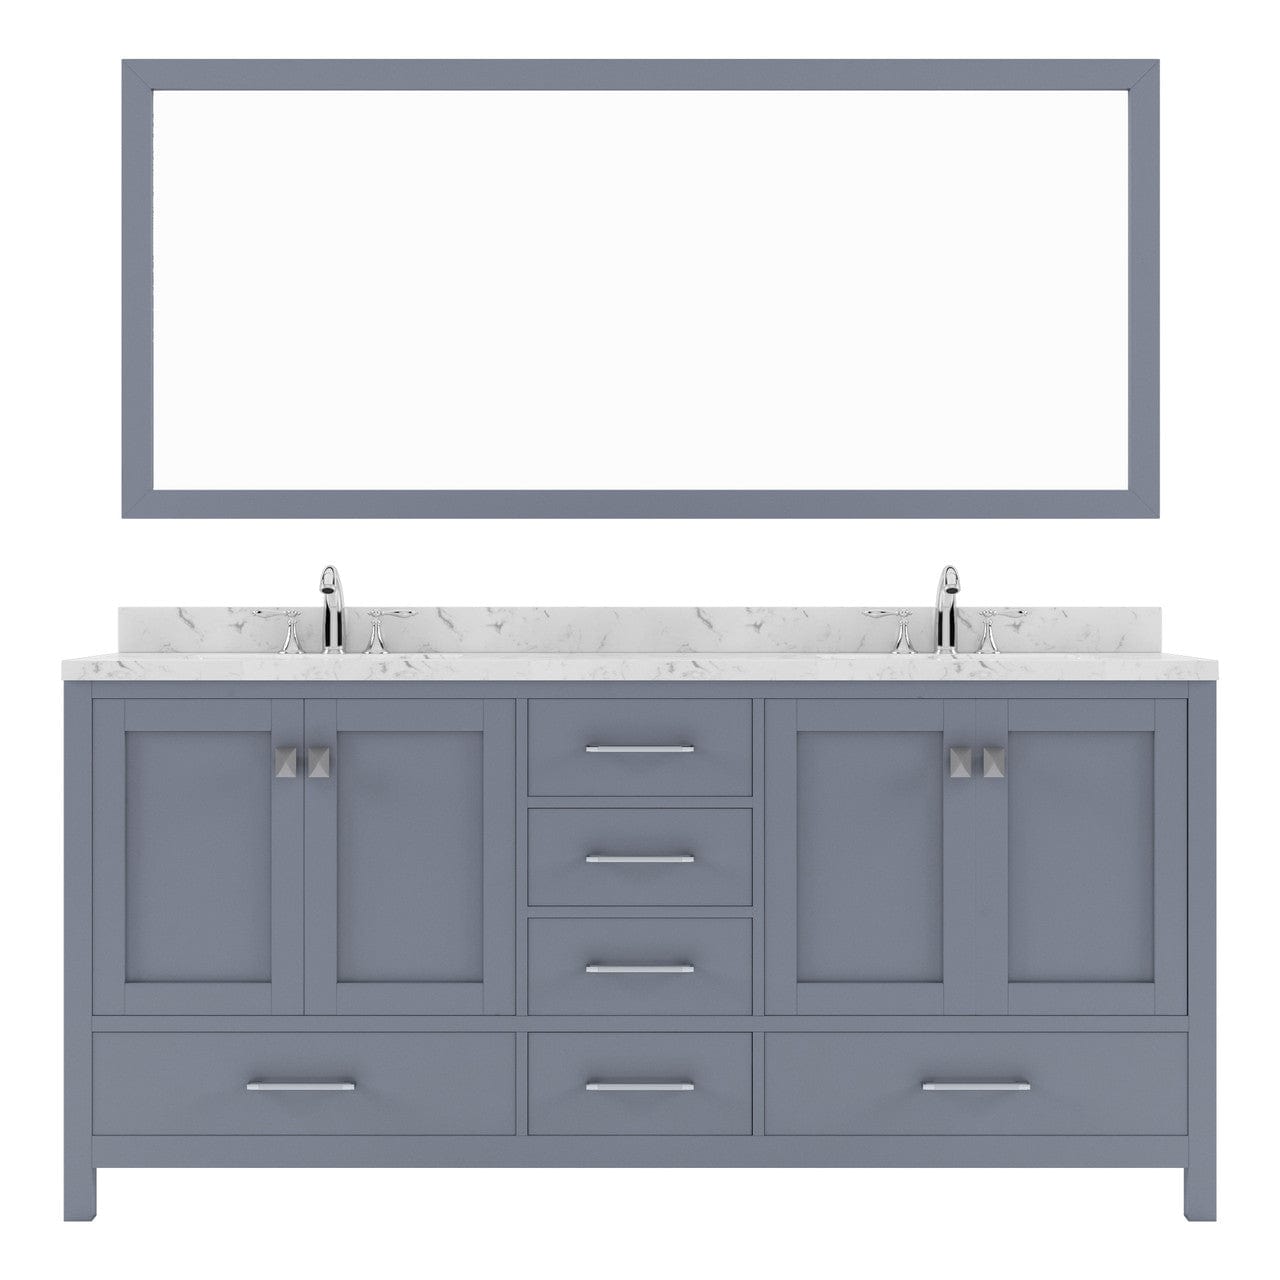 Caroline Avenue 72" Double Bath Vanity in Gray with White Quartz Top and Sinks white background